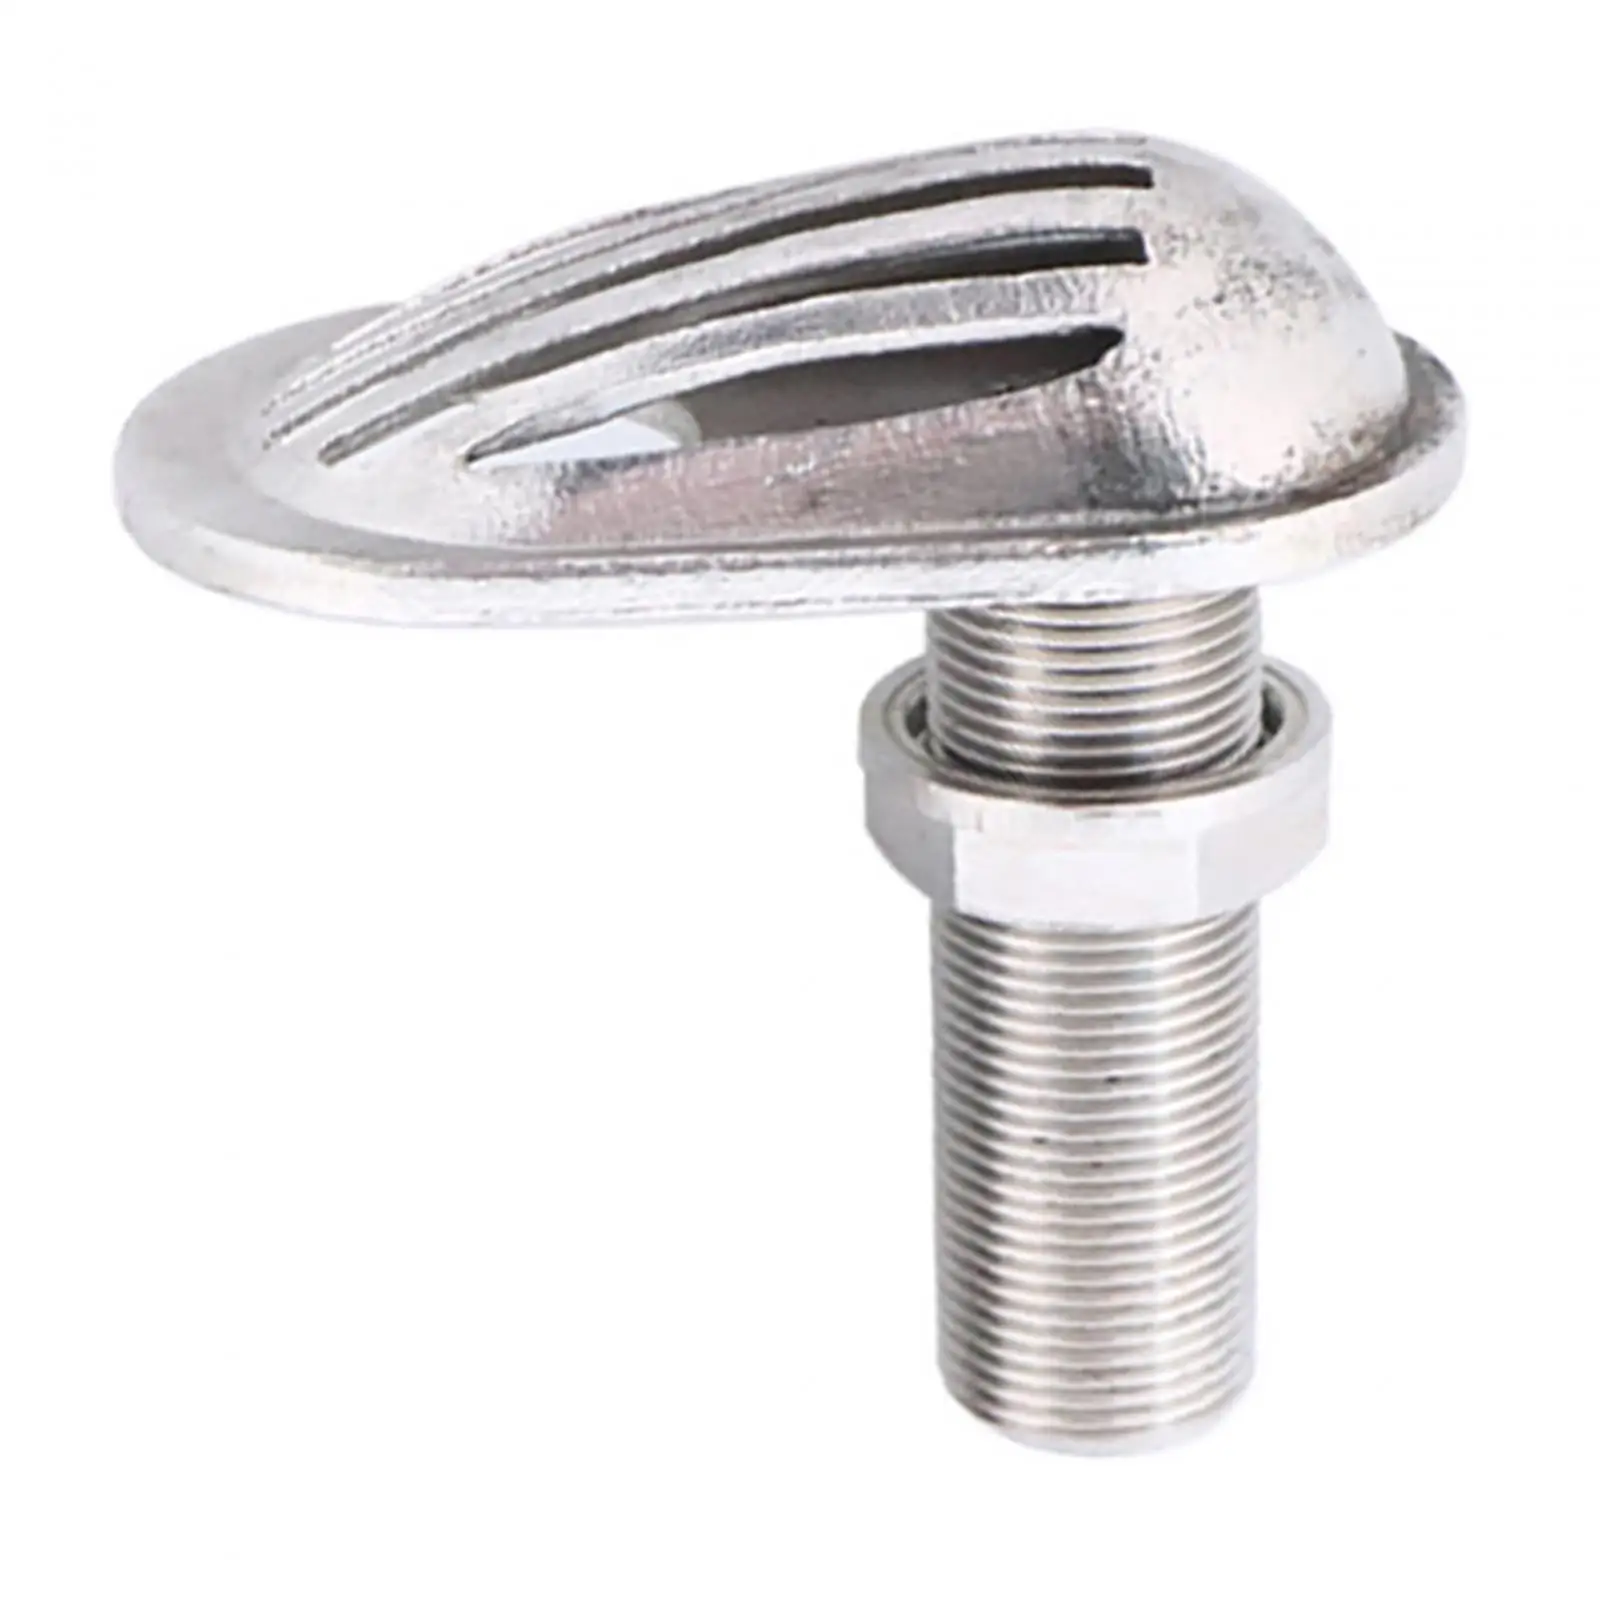 

Marine Boat Intake Strainer Boat Accessories Heavy Duty Filter thru Hull Fittings for Water Sports Rafting Kayak Boats